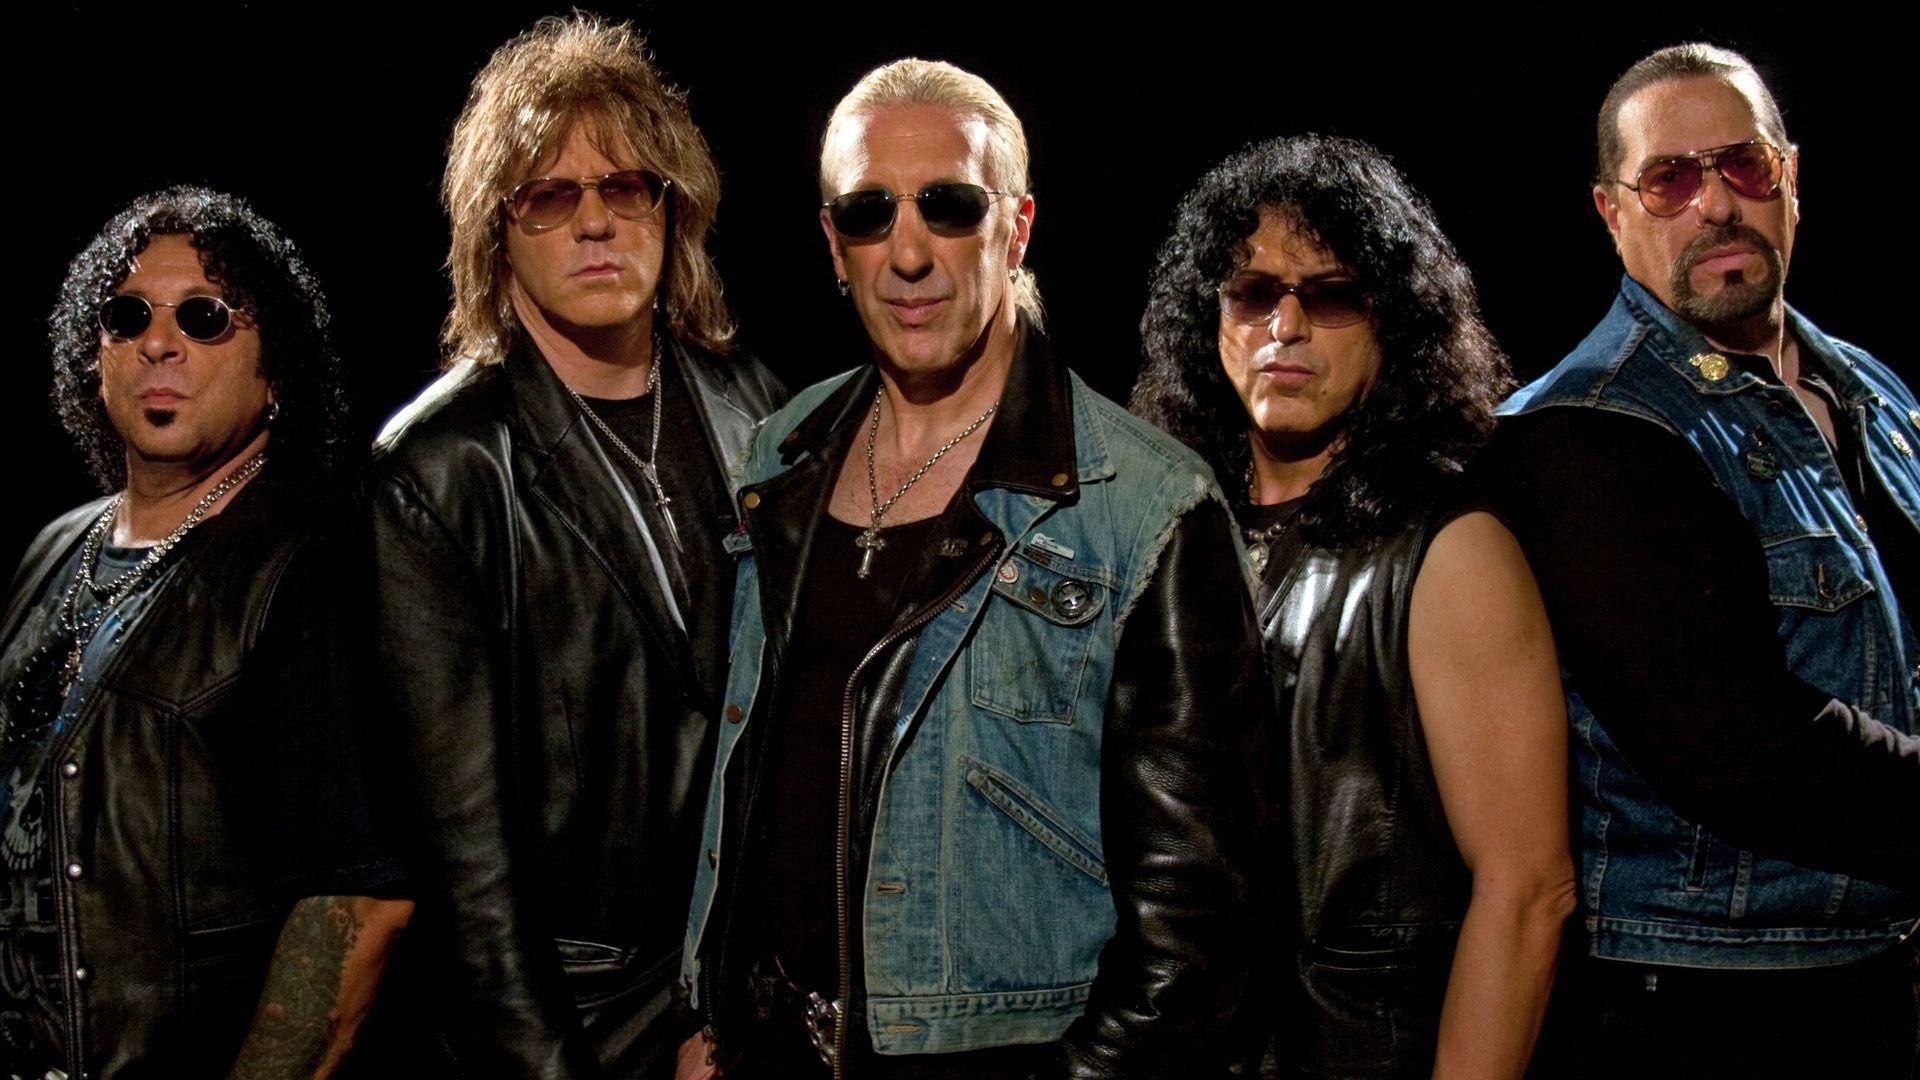 Twisted Sister Wallpapers Wallpapers - Most Popular Twisted Sister Wallpapers Backgrounds 1920x1080